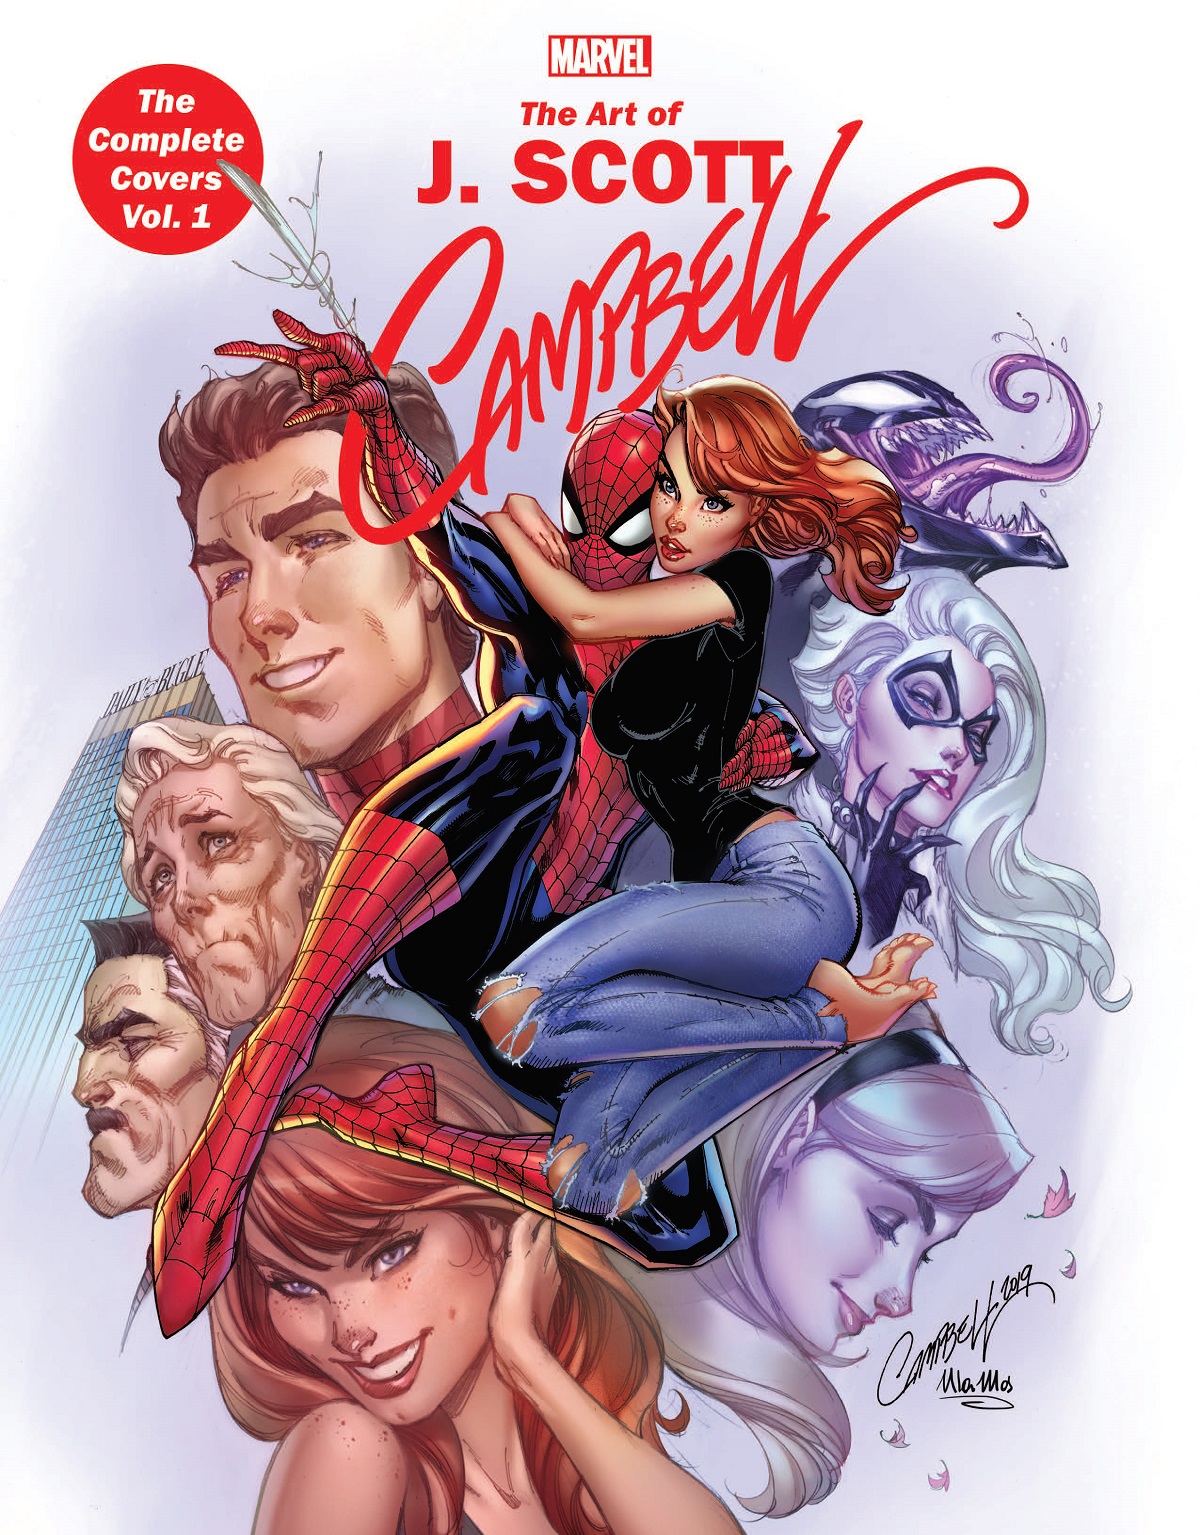 Marvel Monograph: The Art Of J. Scott Campbell - The Complete Covers Vol. 1 (Trade Paperback)